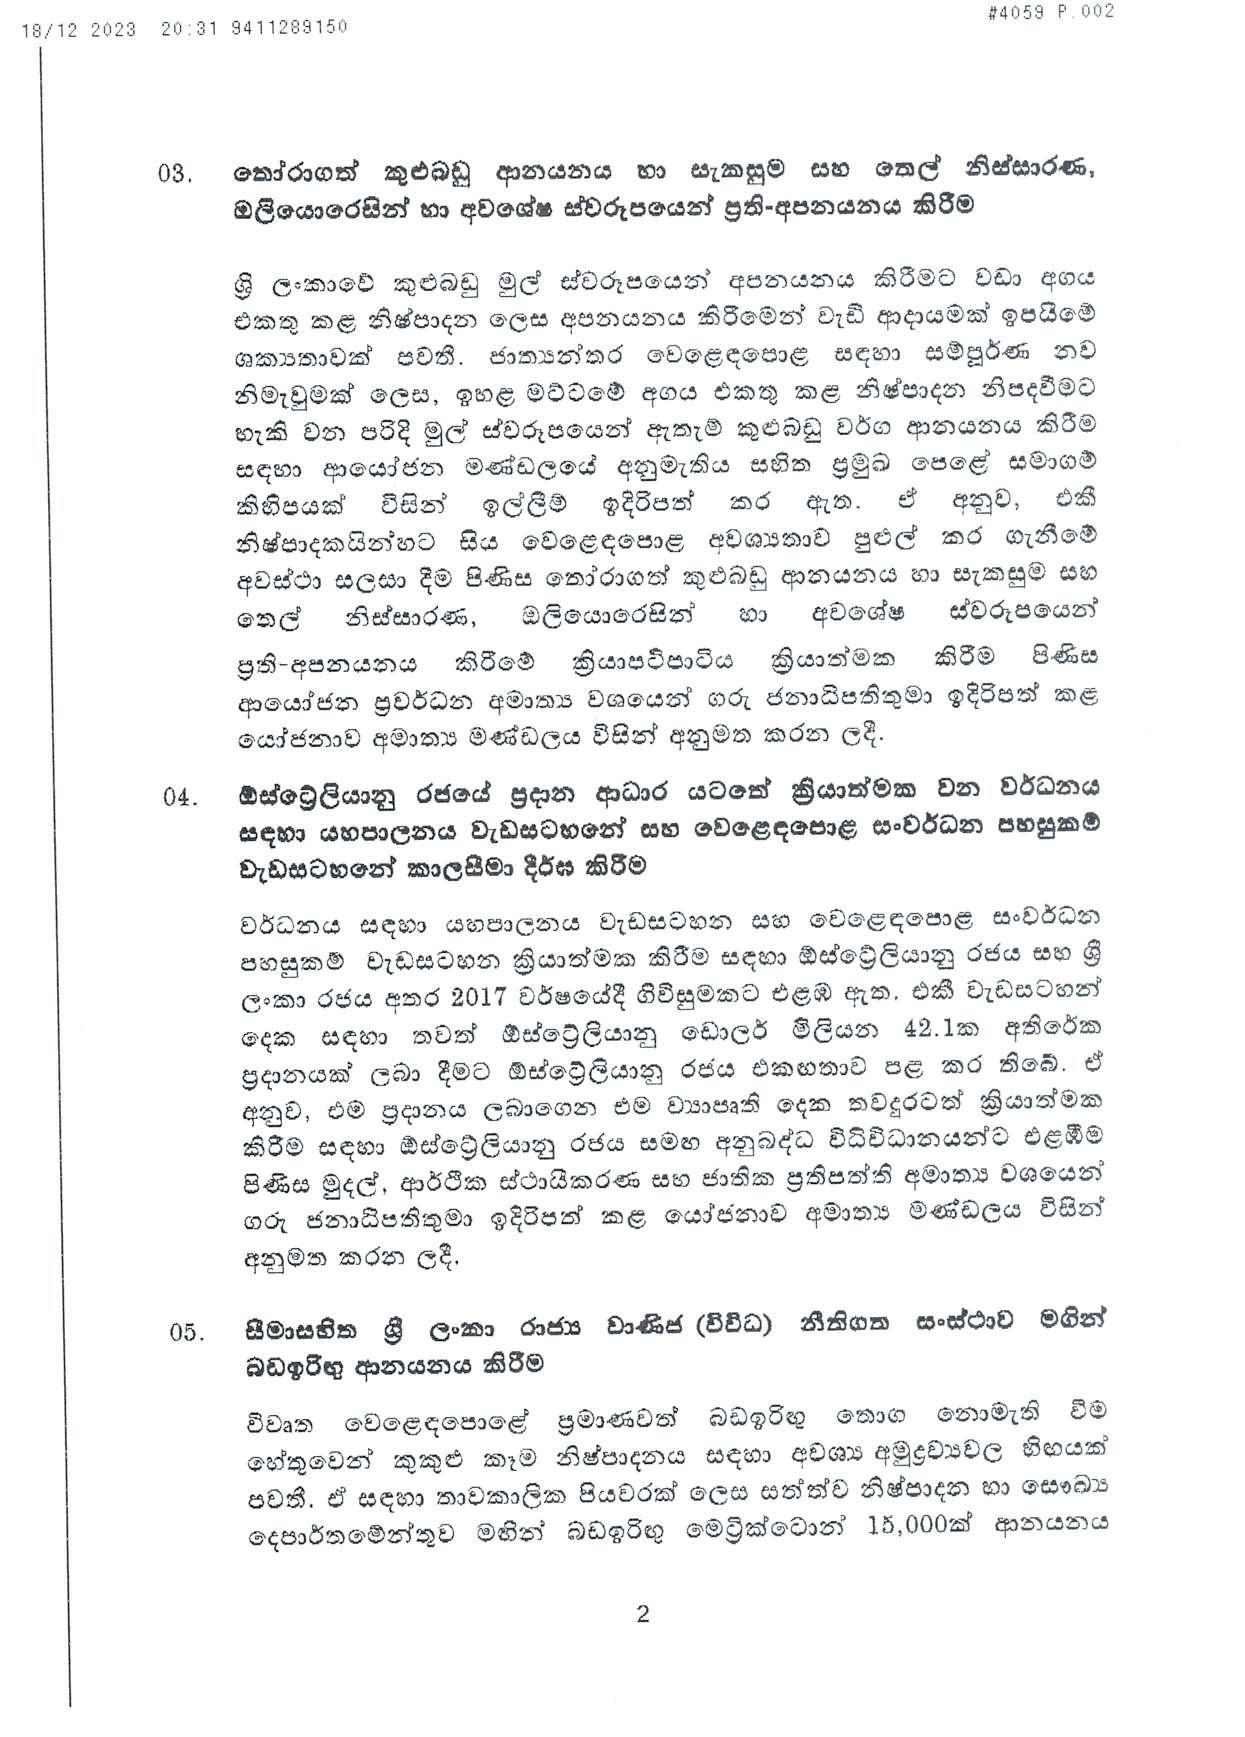 Cabinet Decision on 18.12.2023 page 002